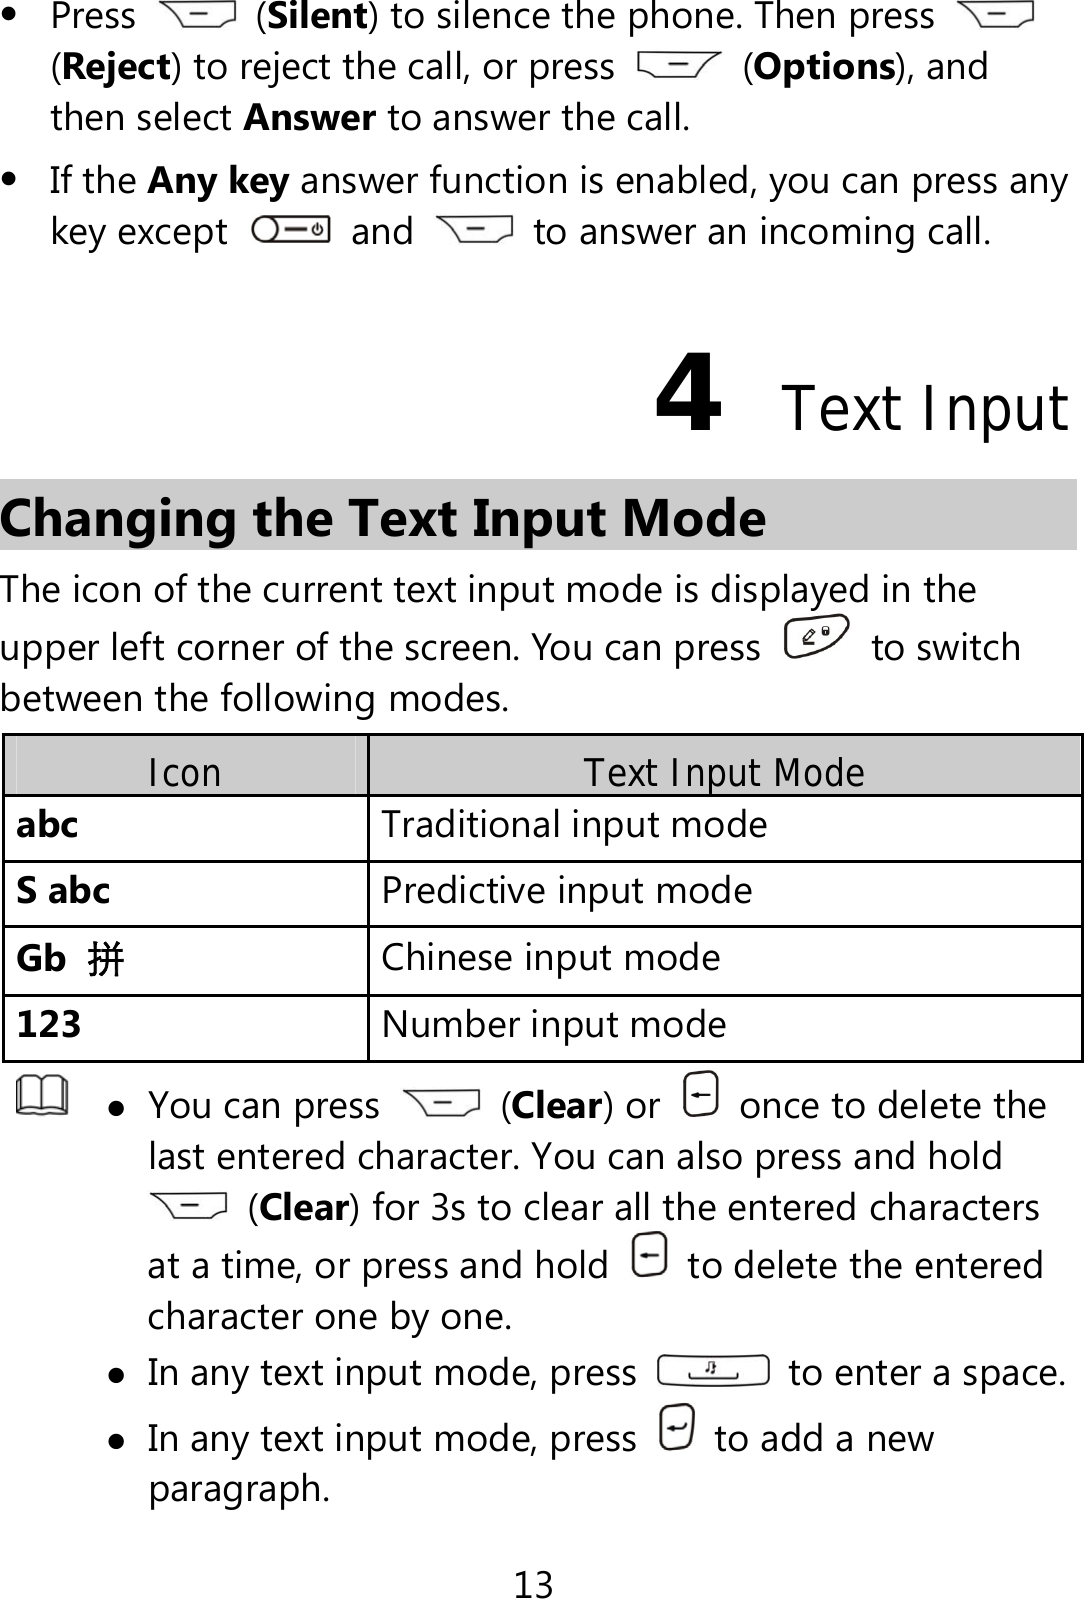 13  Press   (Silent) to silence the phone. Then press   (Reject) to reject the call, or press   (Options), and then select Answer to answer the call.  If the Any key answer function is enabled, you can press any key except   and    to answer an incoming call.   4  Text Input Changing the Text Input Mode The icon of the current text input mode is displayed in the upper left corner of the screen. You can press   to switch between the following modes. Icon  Text Input Mode abc  Traditional input modeS abc  Predictive input modeGb  拼 Chinese input mode 123  Number input mode  You can press   (Clear) or    once to delete the last entered character. You can also press and hold  (Clear) for 3s to clear all the entered characters at a time, or press and hold    to delete the entered character one by one.  In any text input mode, press    to enter a space. In any text input mode, press    to add a new paragraph. 